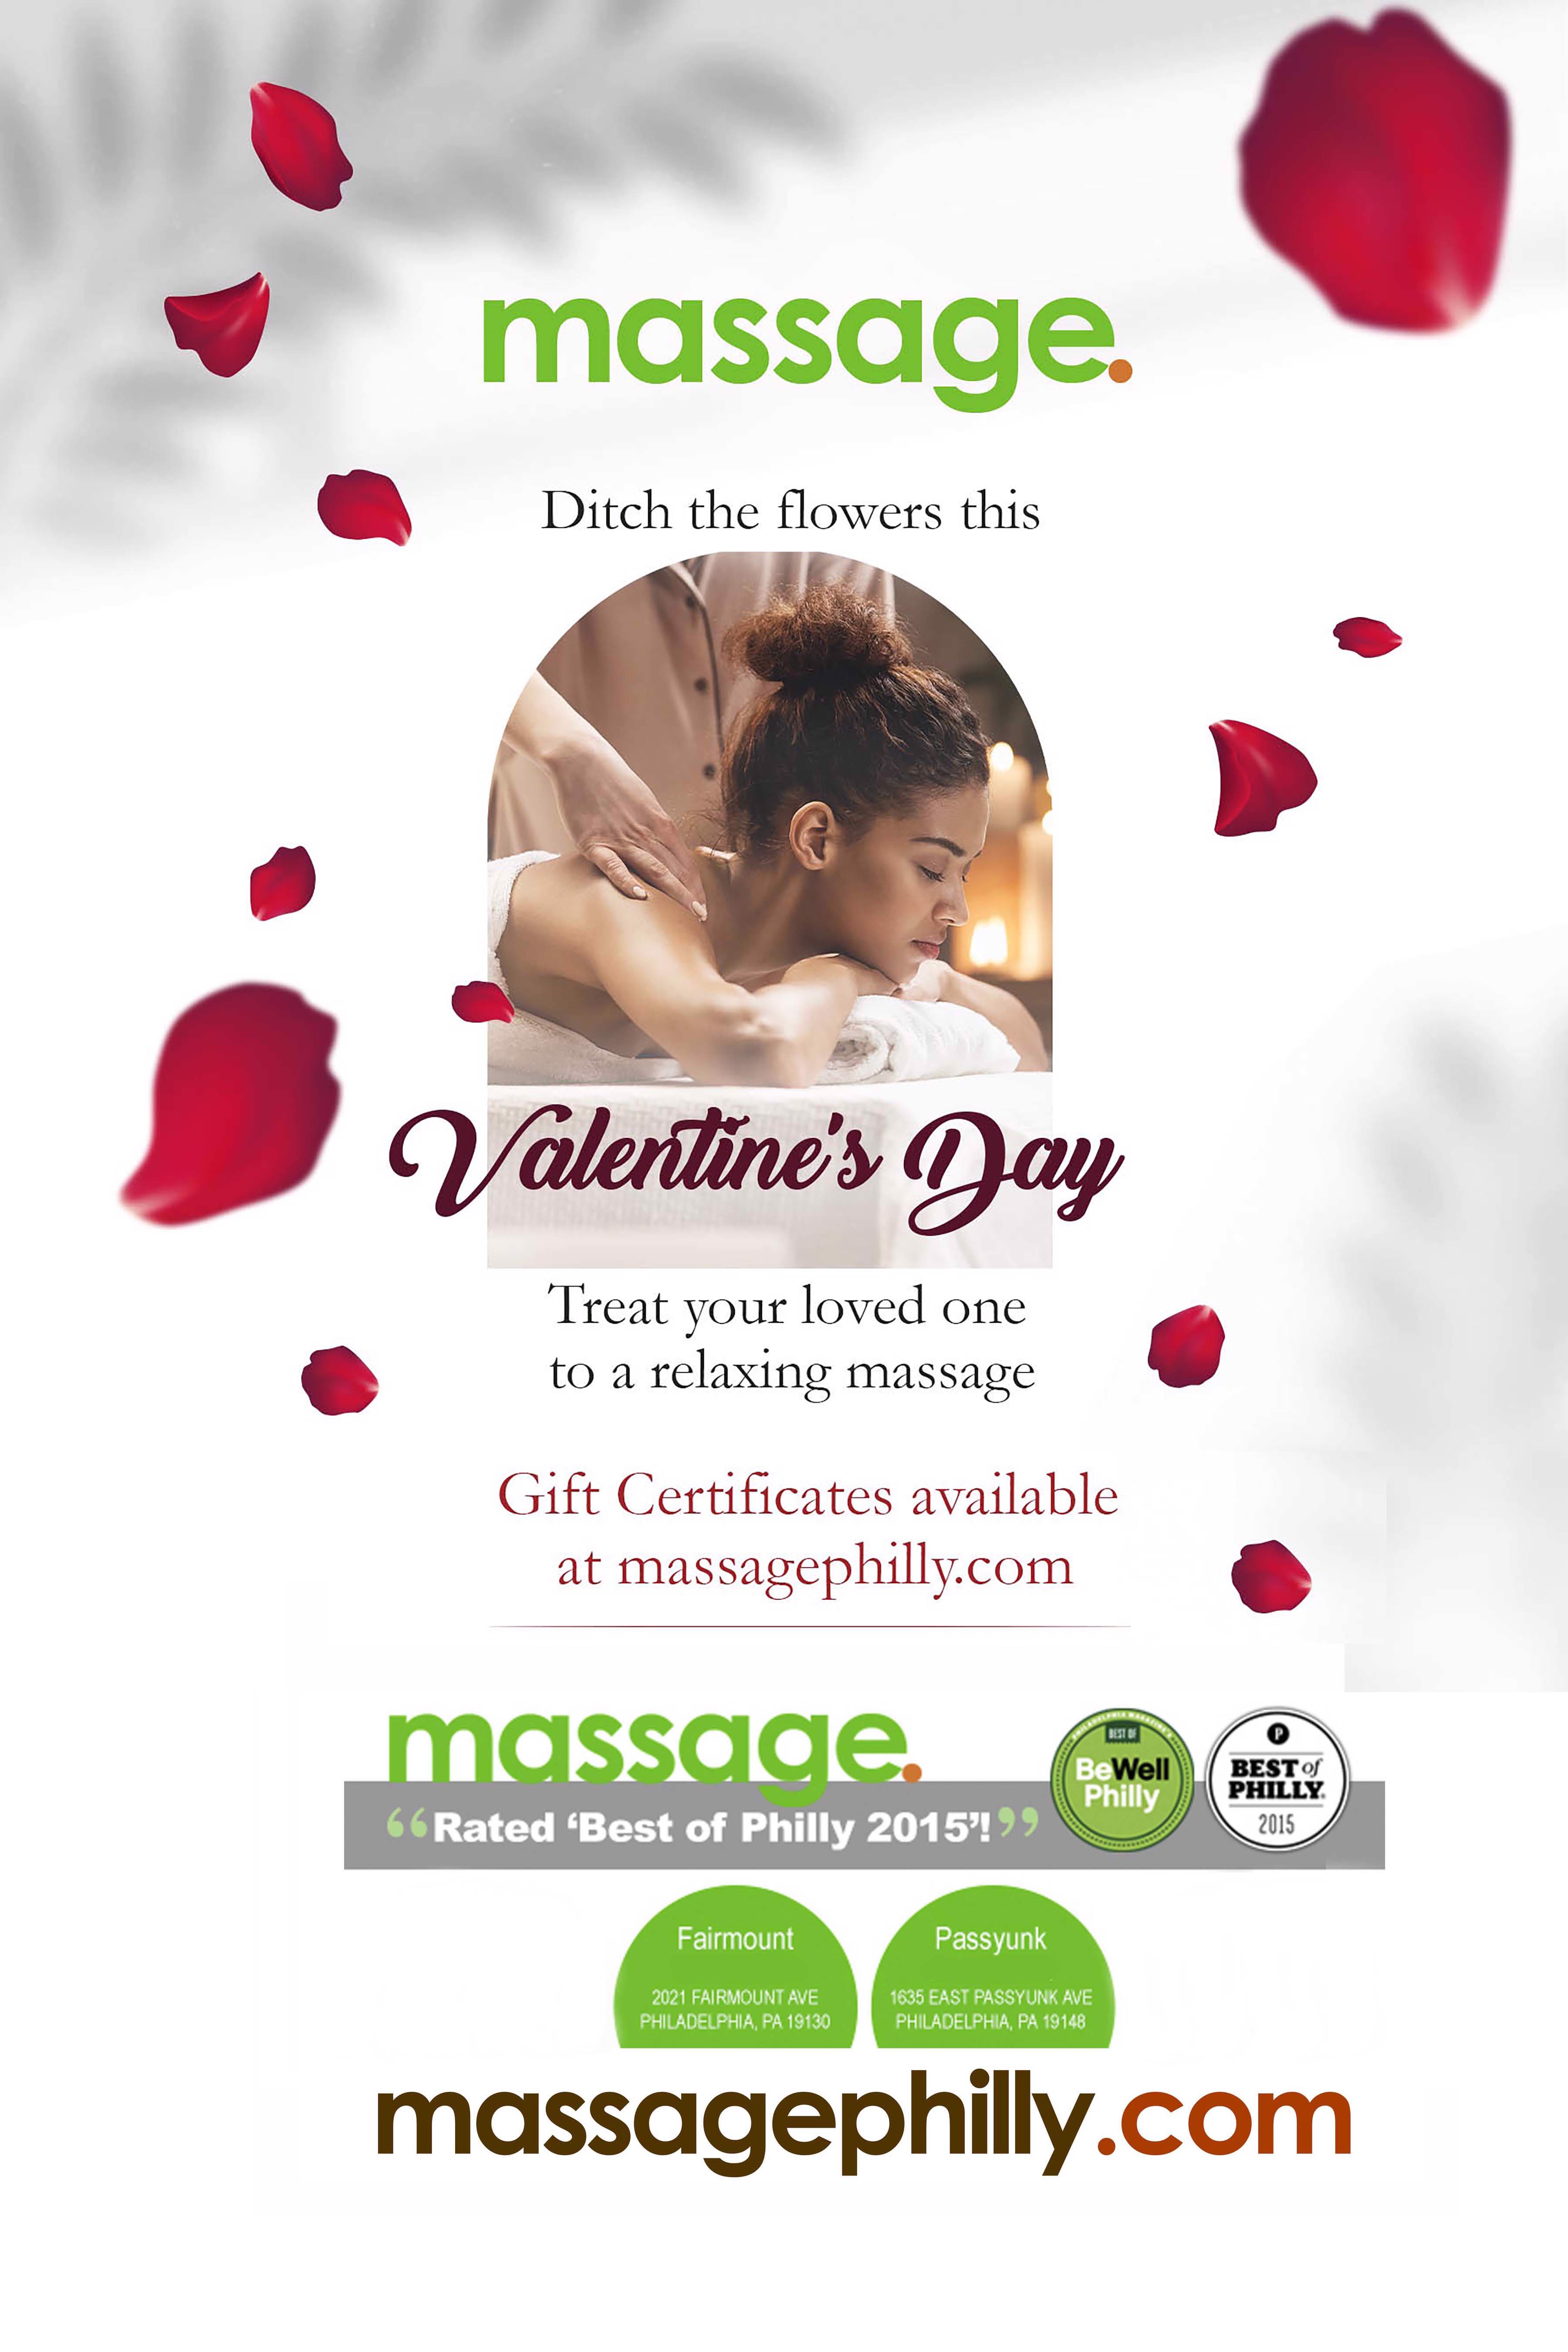 Ditch the flowers this Valentine's Day and treat your loved ones to a relaxing massage! Buy a Gift Certificate at MassagePhilly.com and Schedule your appointment now!